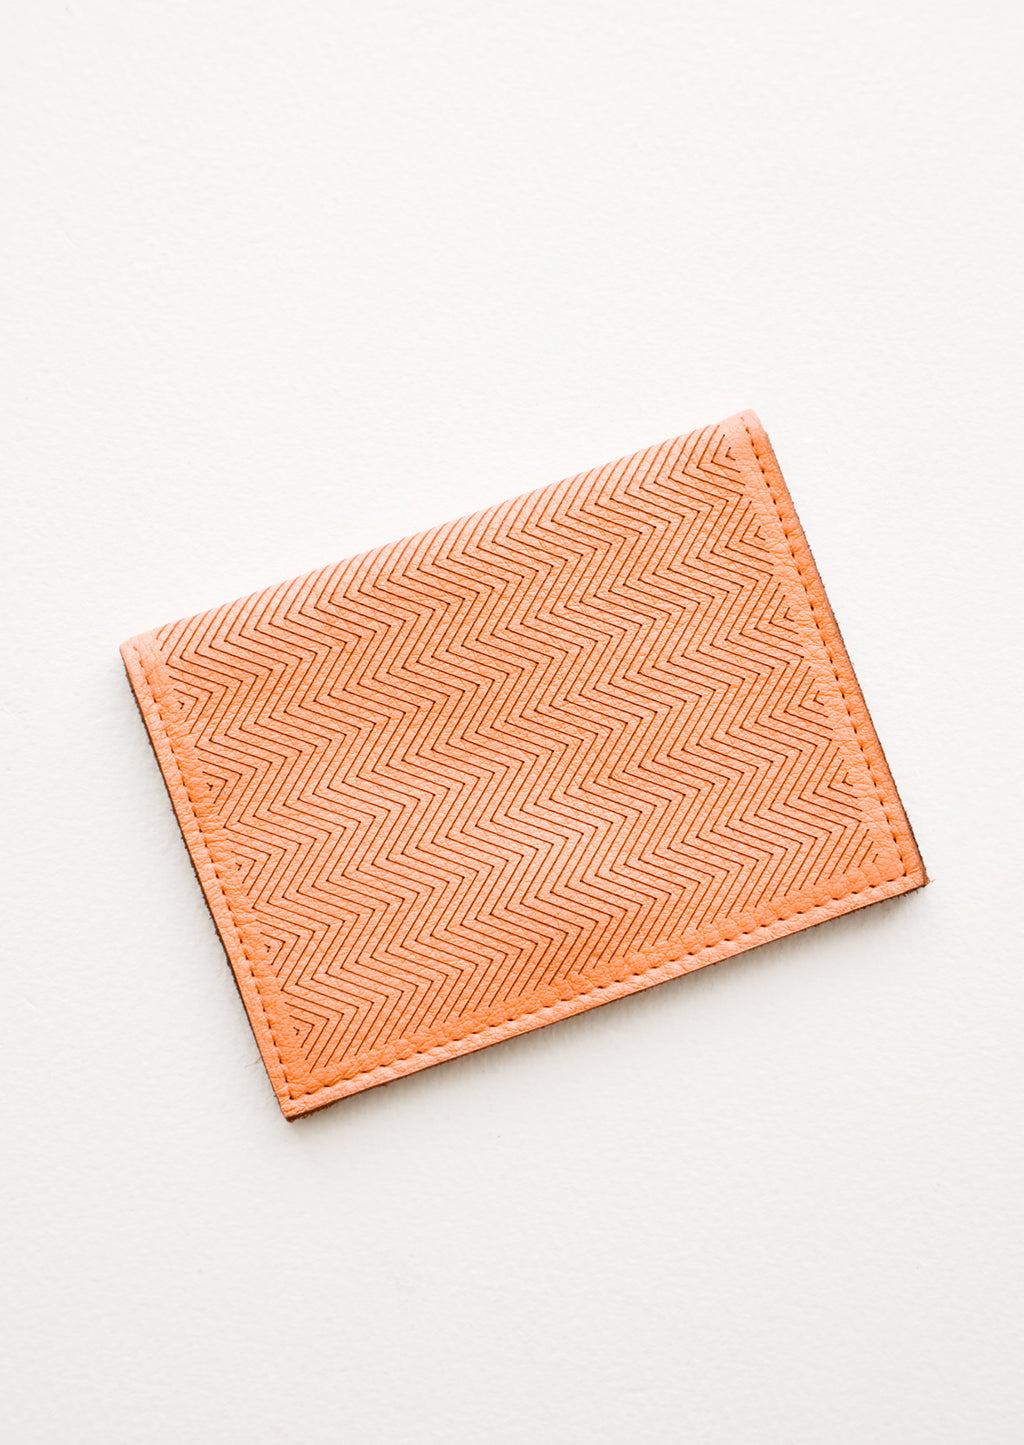 Terracotta: Slim terracotta orange leather wallet with two interior slip pockets that folds closed with a snap, shown closed with zig zag etched pattern. 